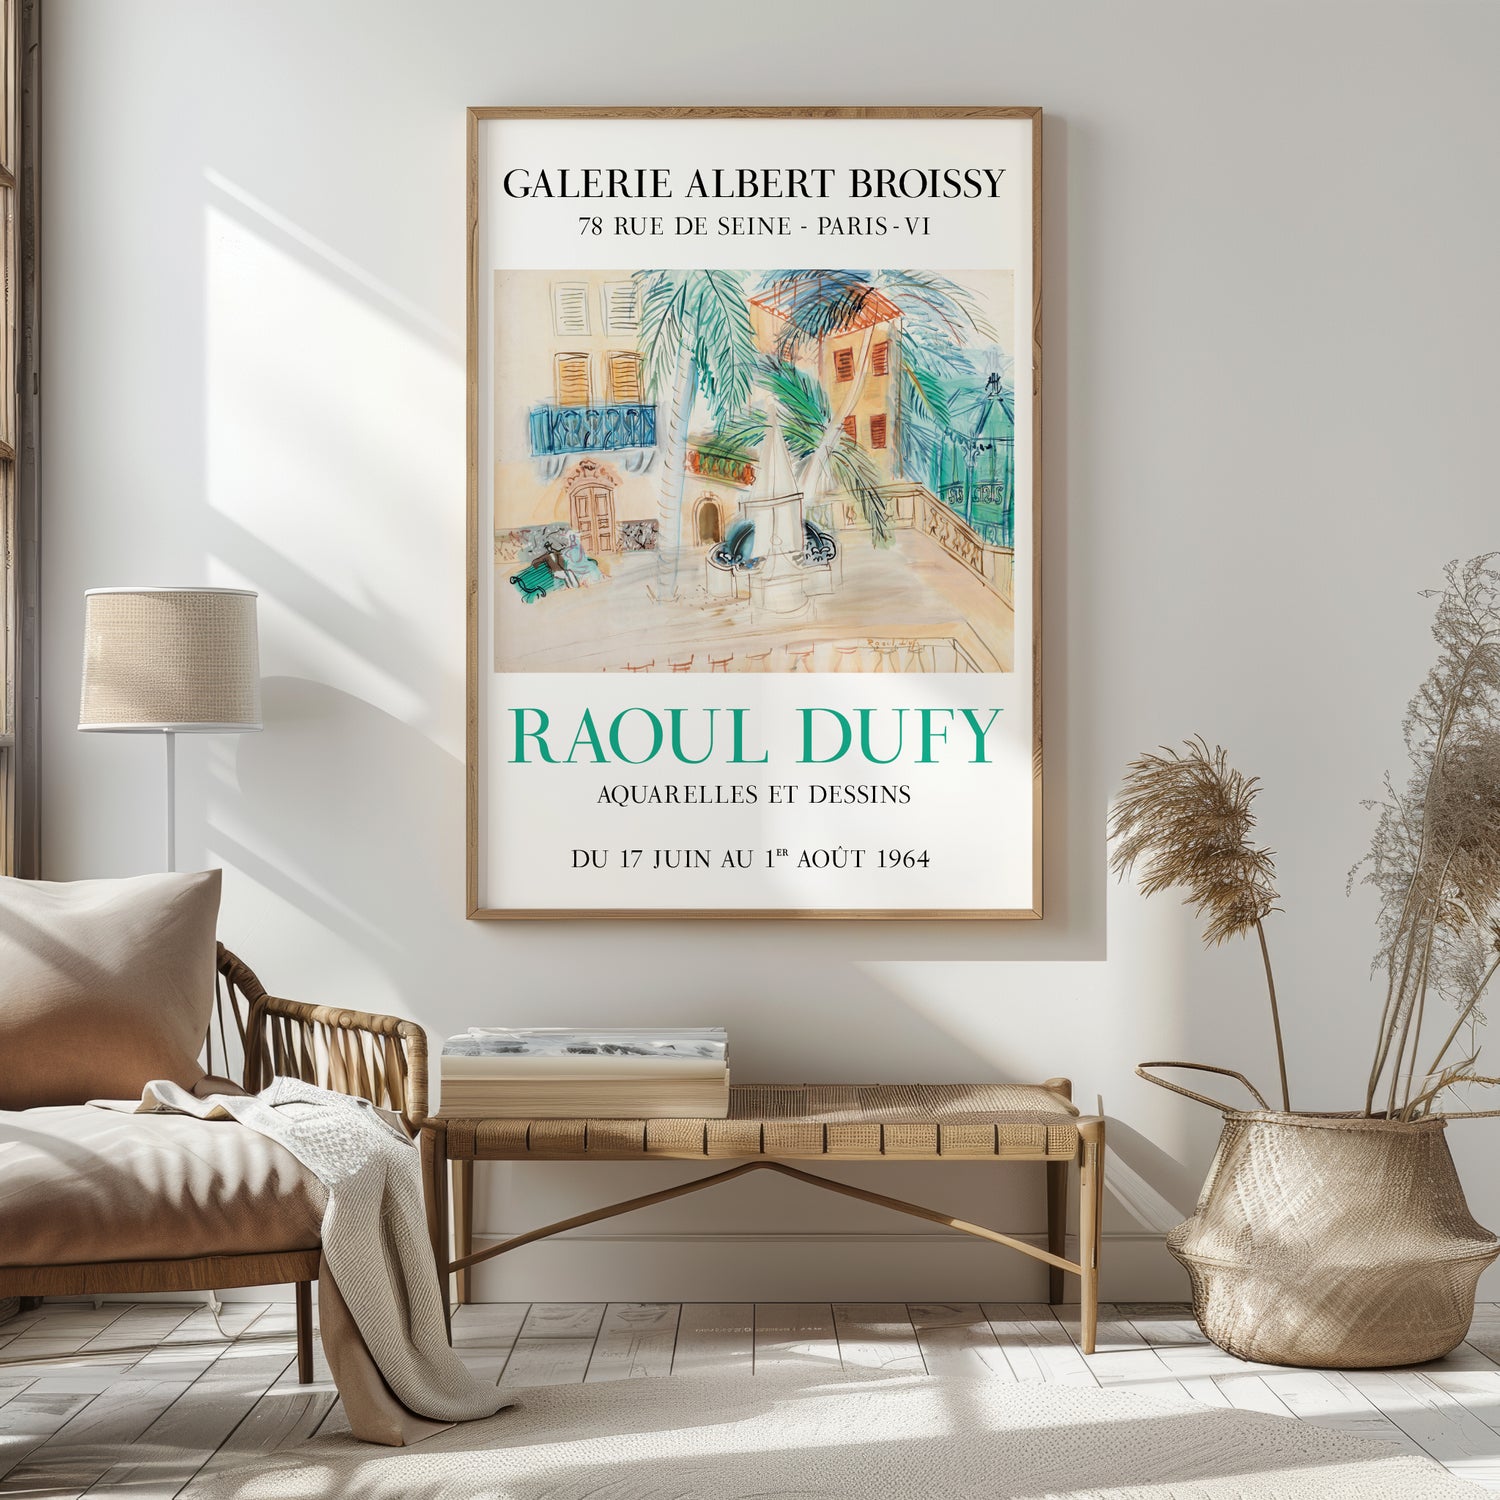 Raoul Dufy Exhibition Posters